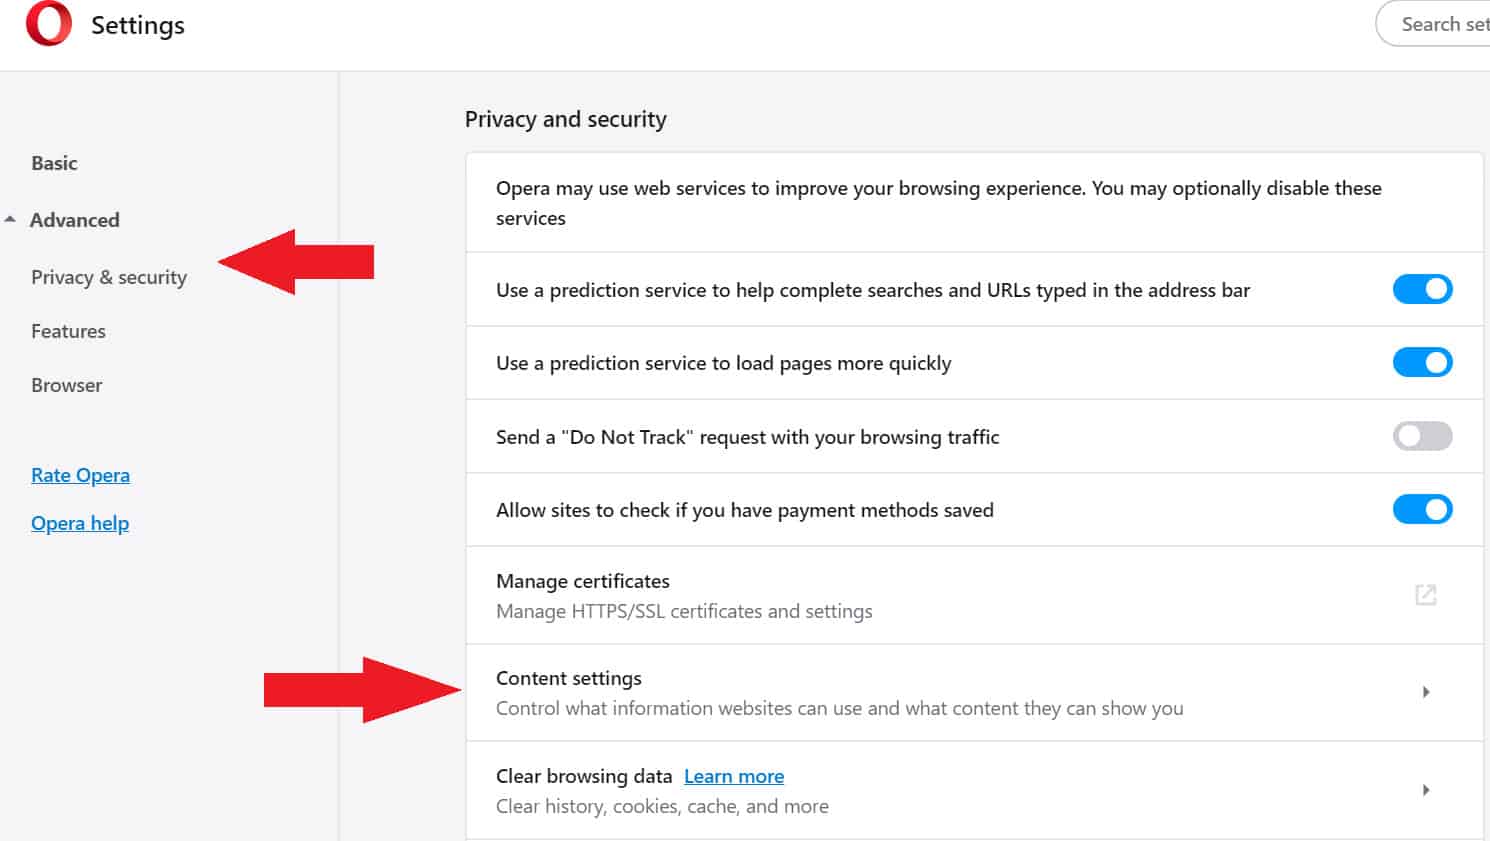 Select "Settings" from the drop-down menu.
Scroll down and click on "Privacy & Security" or "Clear browsing data".